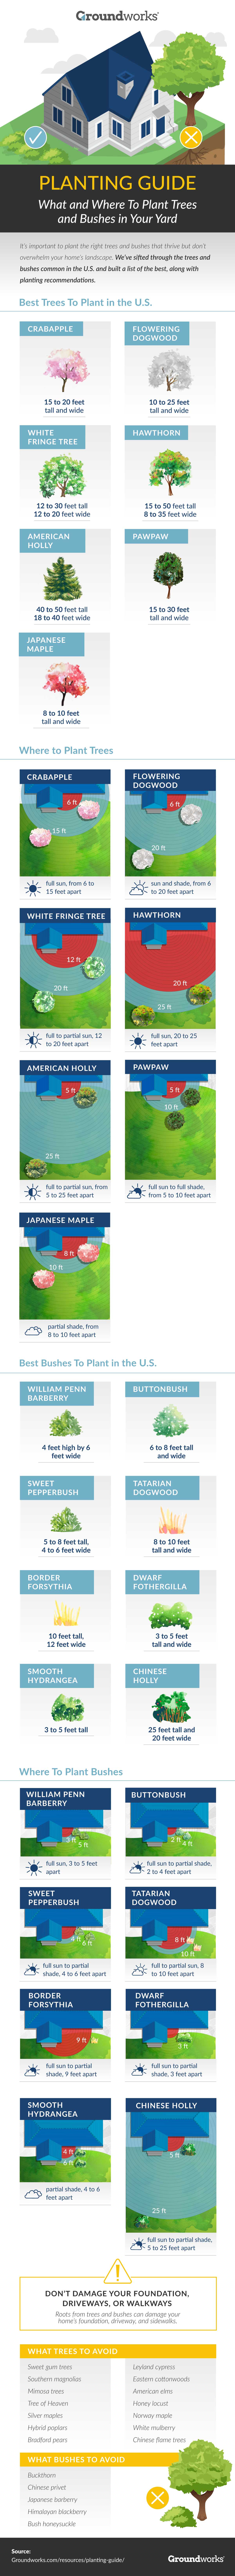 Planting Guide: What & Where To Plant Trees & Bushes in Your Yard